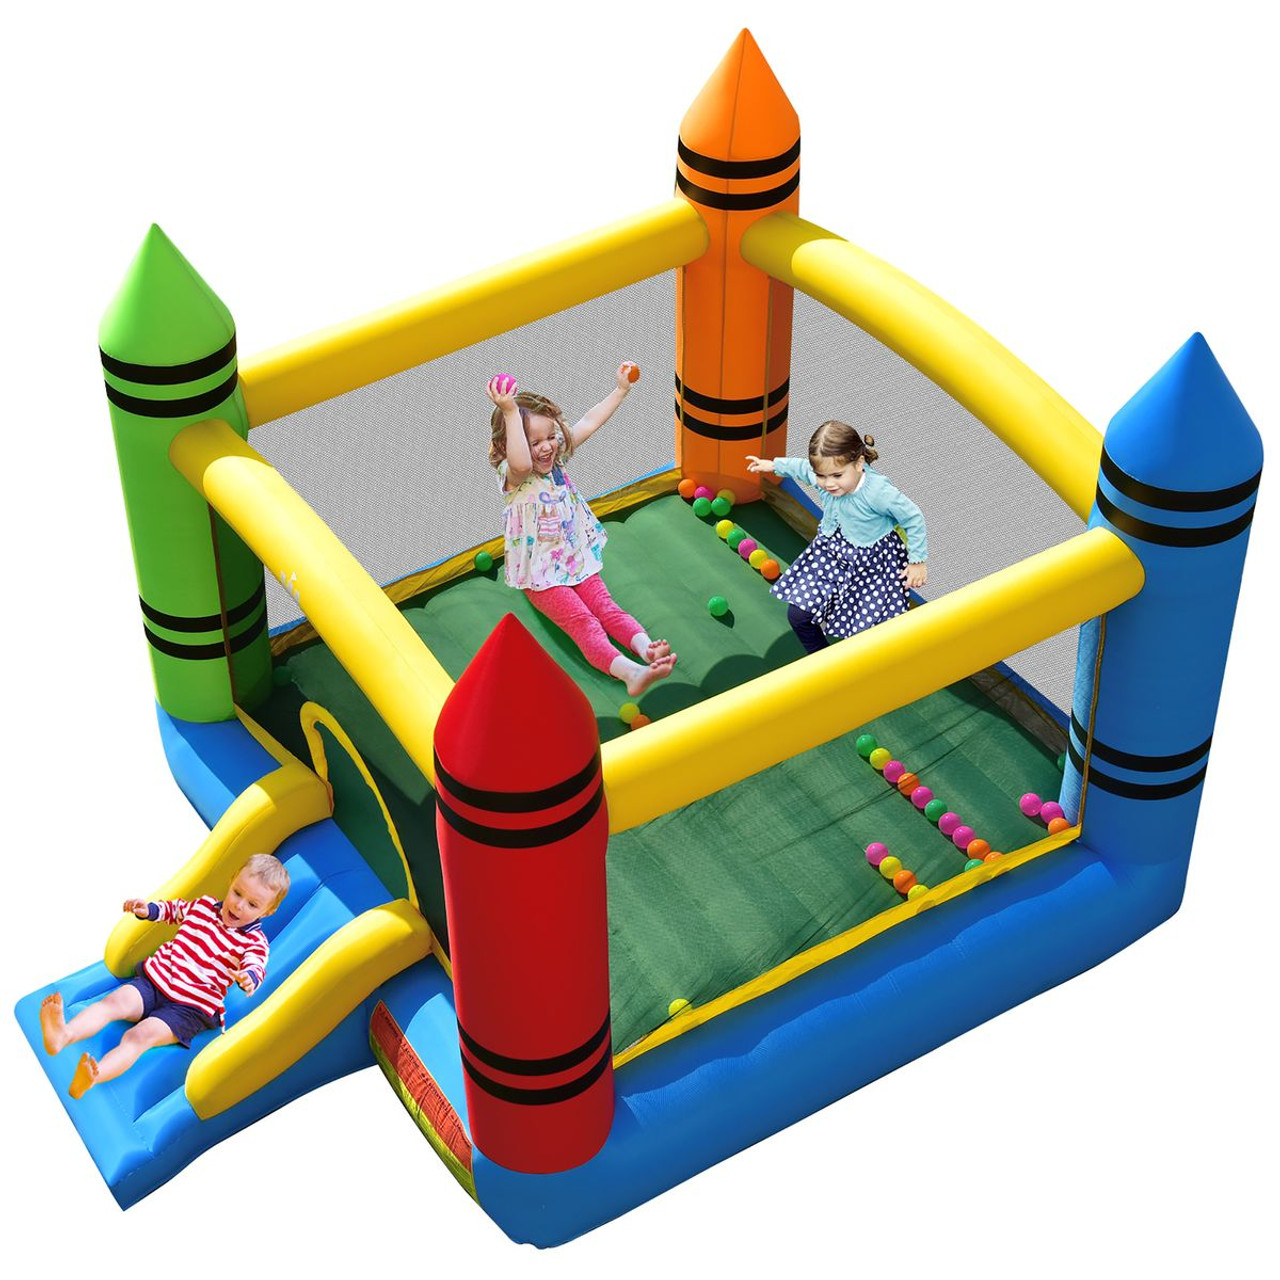 Kids' Inflatable Bounce House with Slide & Ocean Balls product image